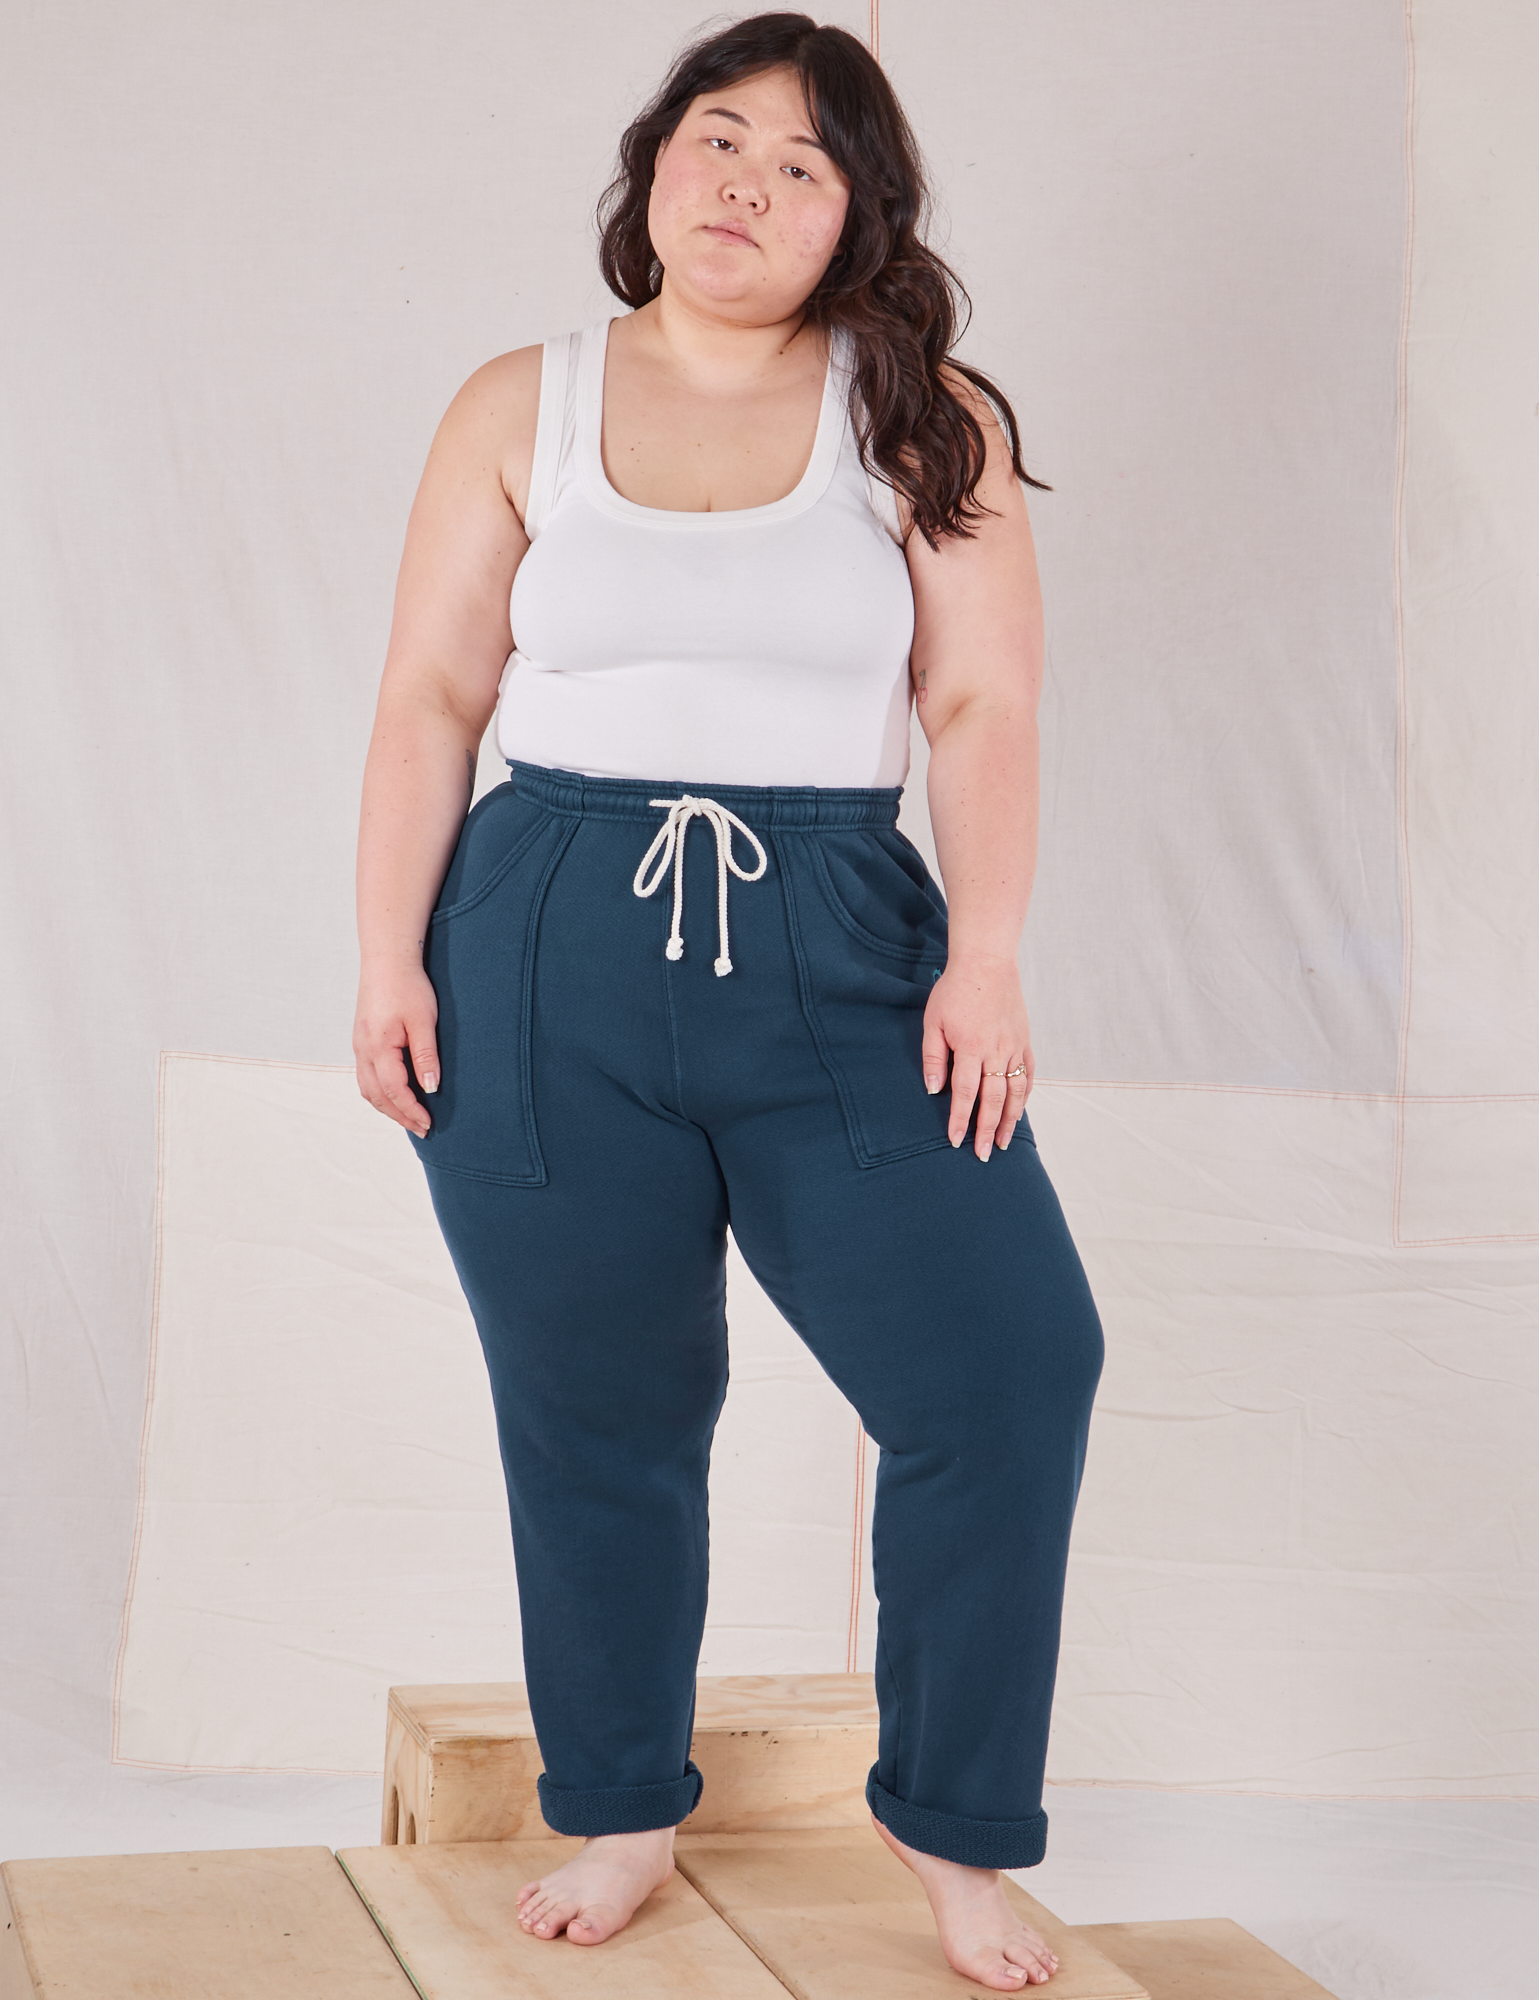 Ashley is 5&#39;7&quot; and wearing L Rolled Cuff Sweat Pants in Lagoon paired with Cropped Tank in vintage tee off-white